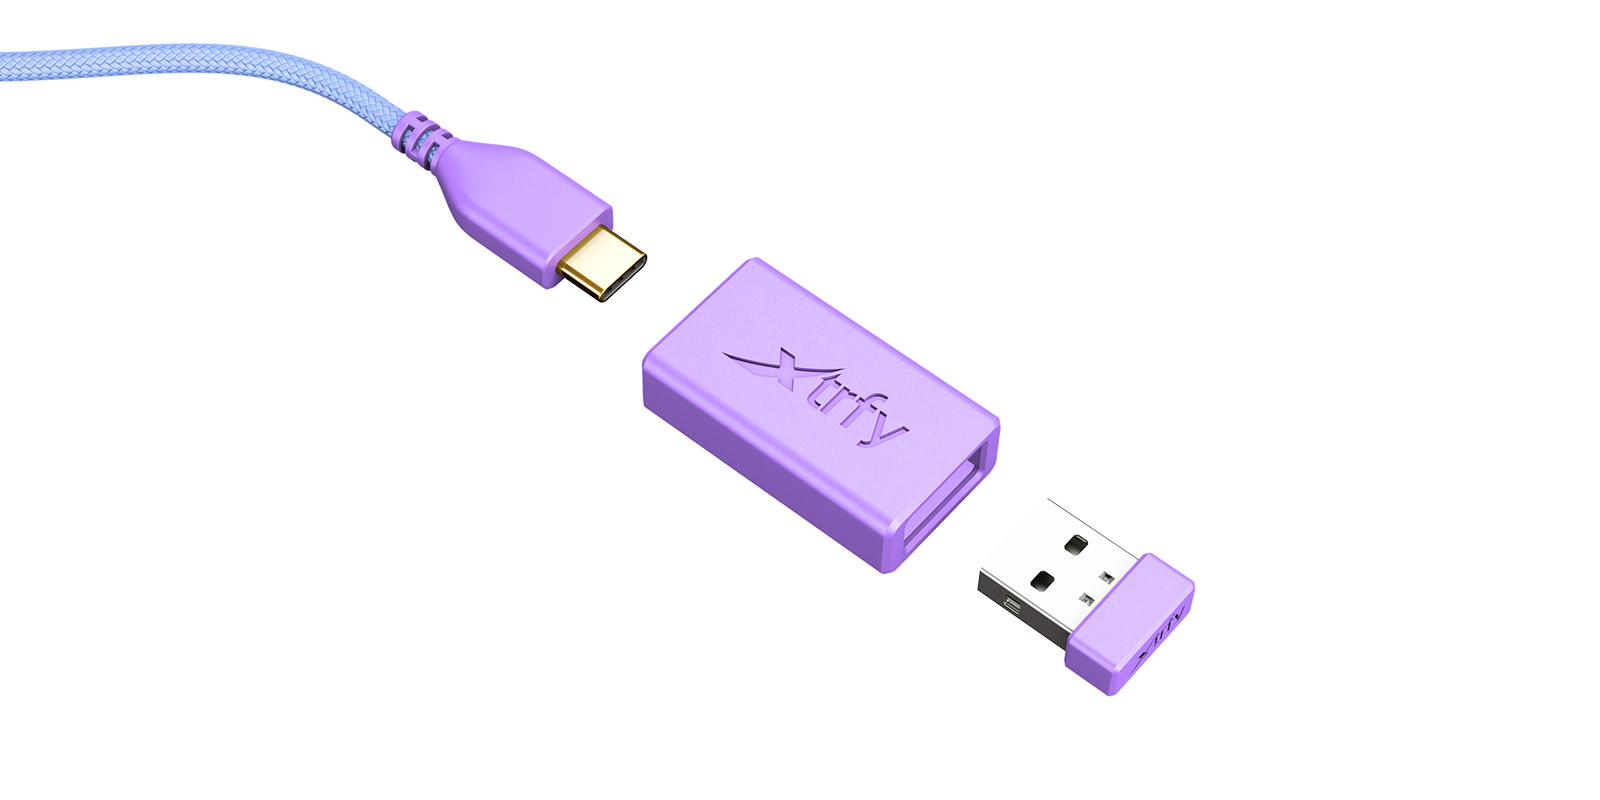 M8-Wireless-Frosty-Purple-Gaming-Mouse_Dongle.jpg